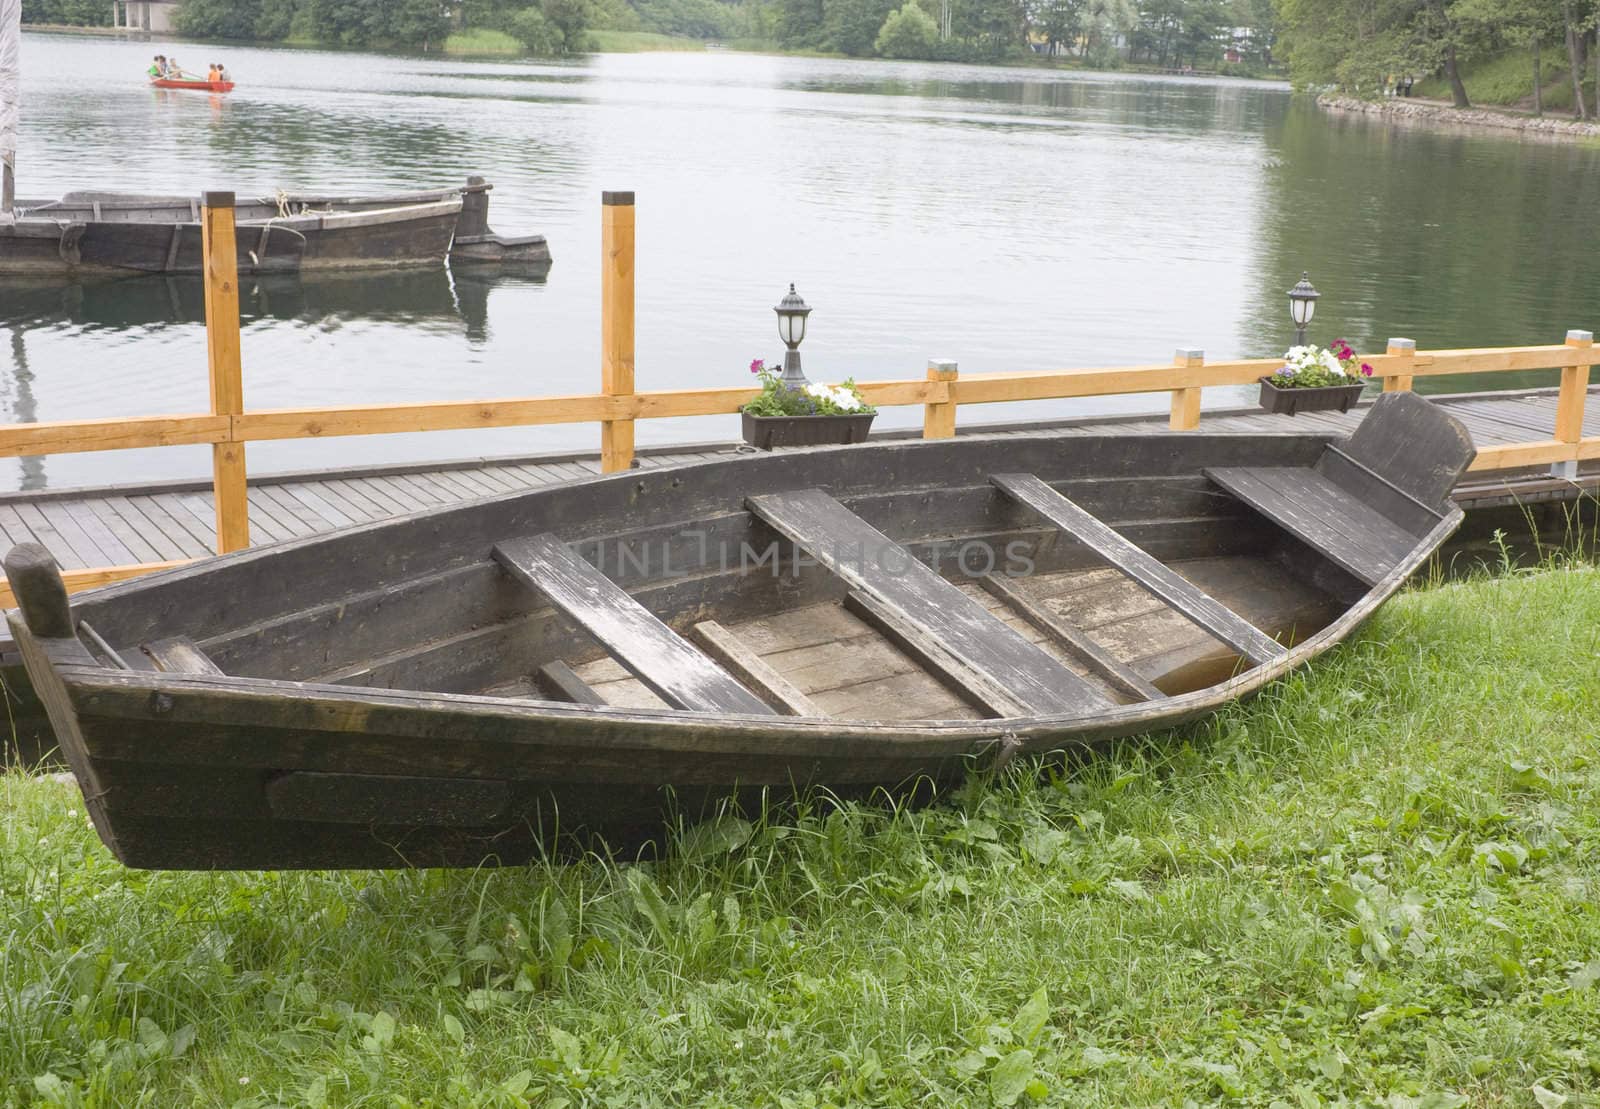 The ancient Lithuanian boat